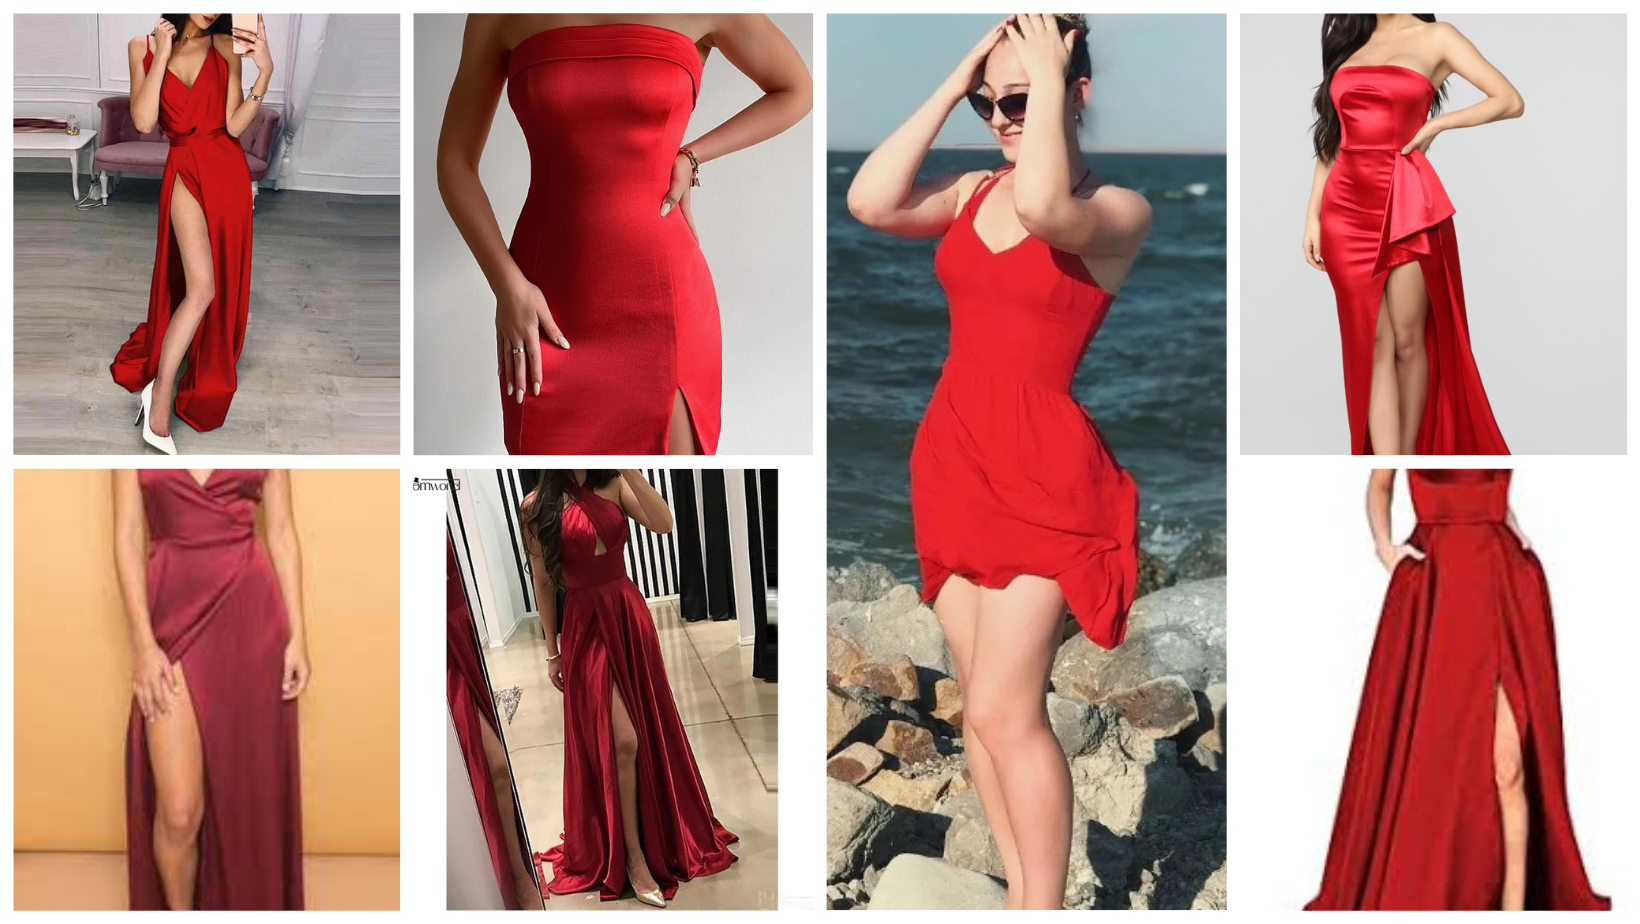 Women’s red dresses for a day date